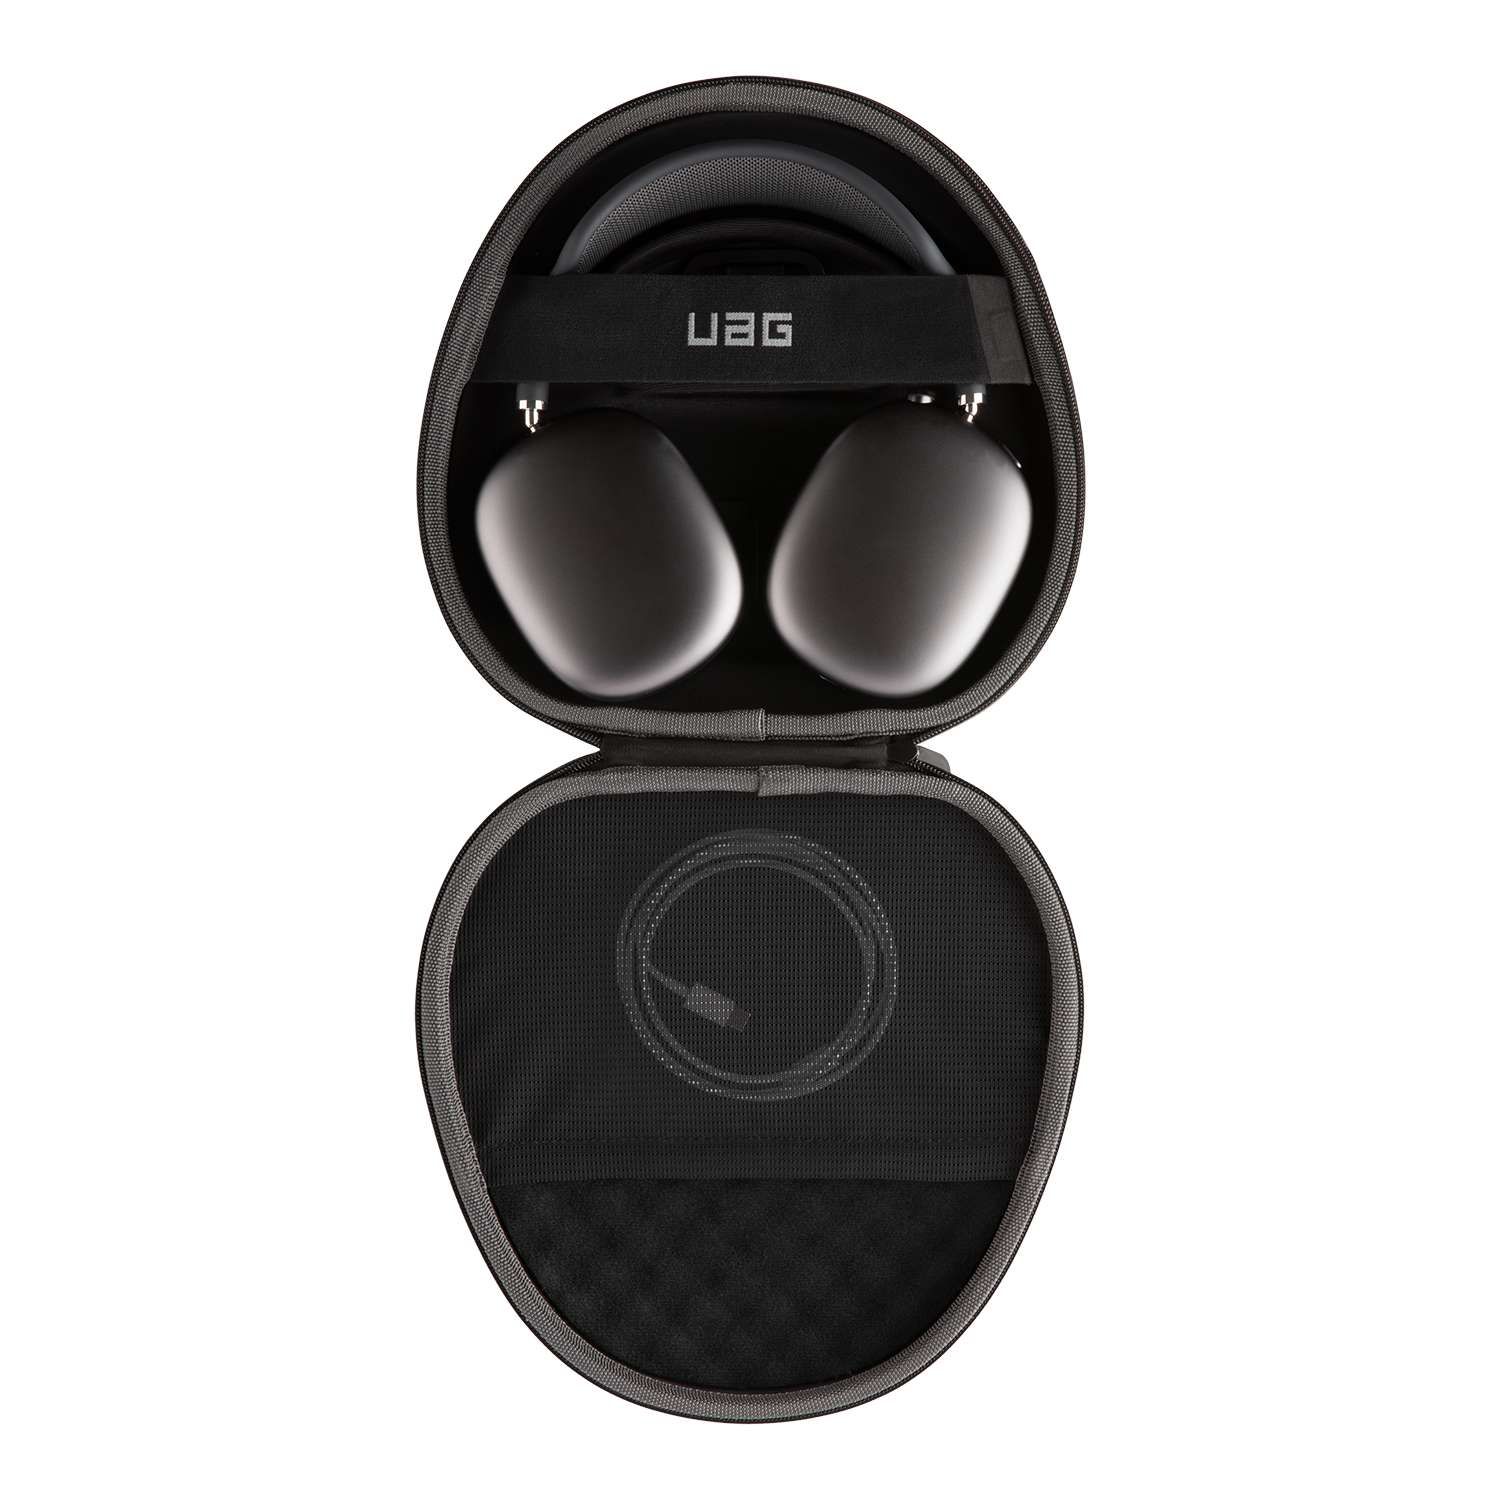  Hộp chống sốc UAG Ration Protective cho Airpods Max 